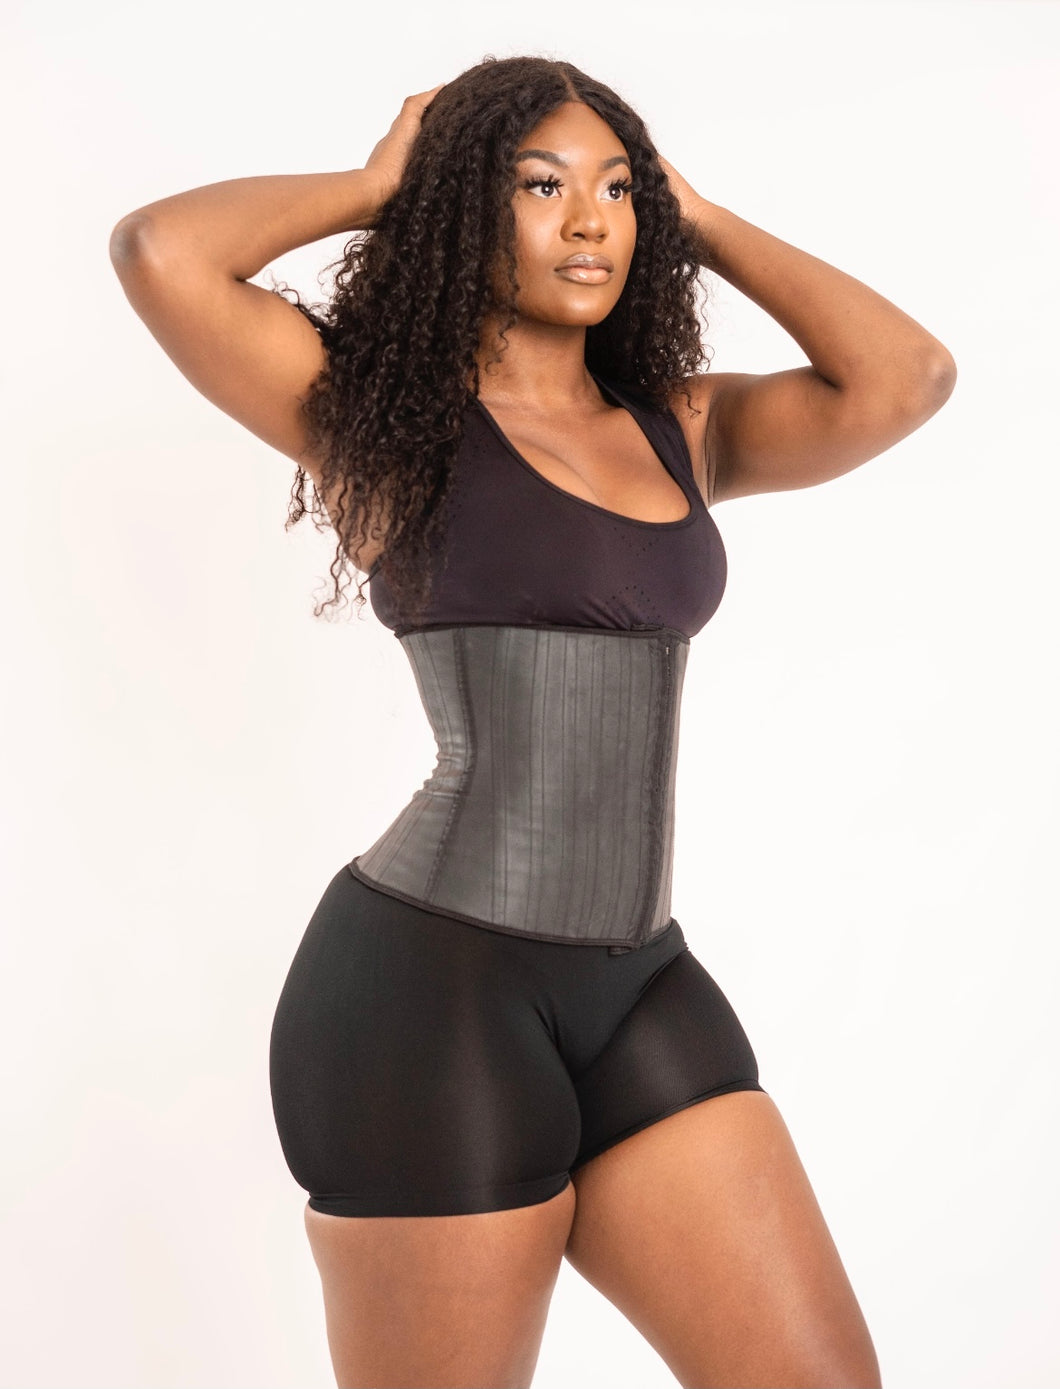 The 25 steel boned waist trainer is still a crowd favourite.Do not miss out  ☆Instant hourglass figure ☆Invisible underneath clothes